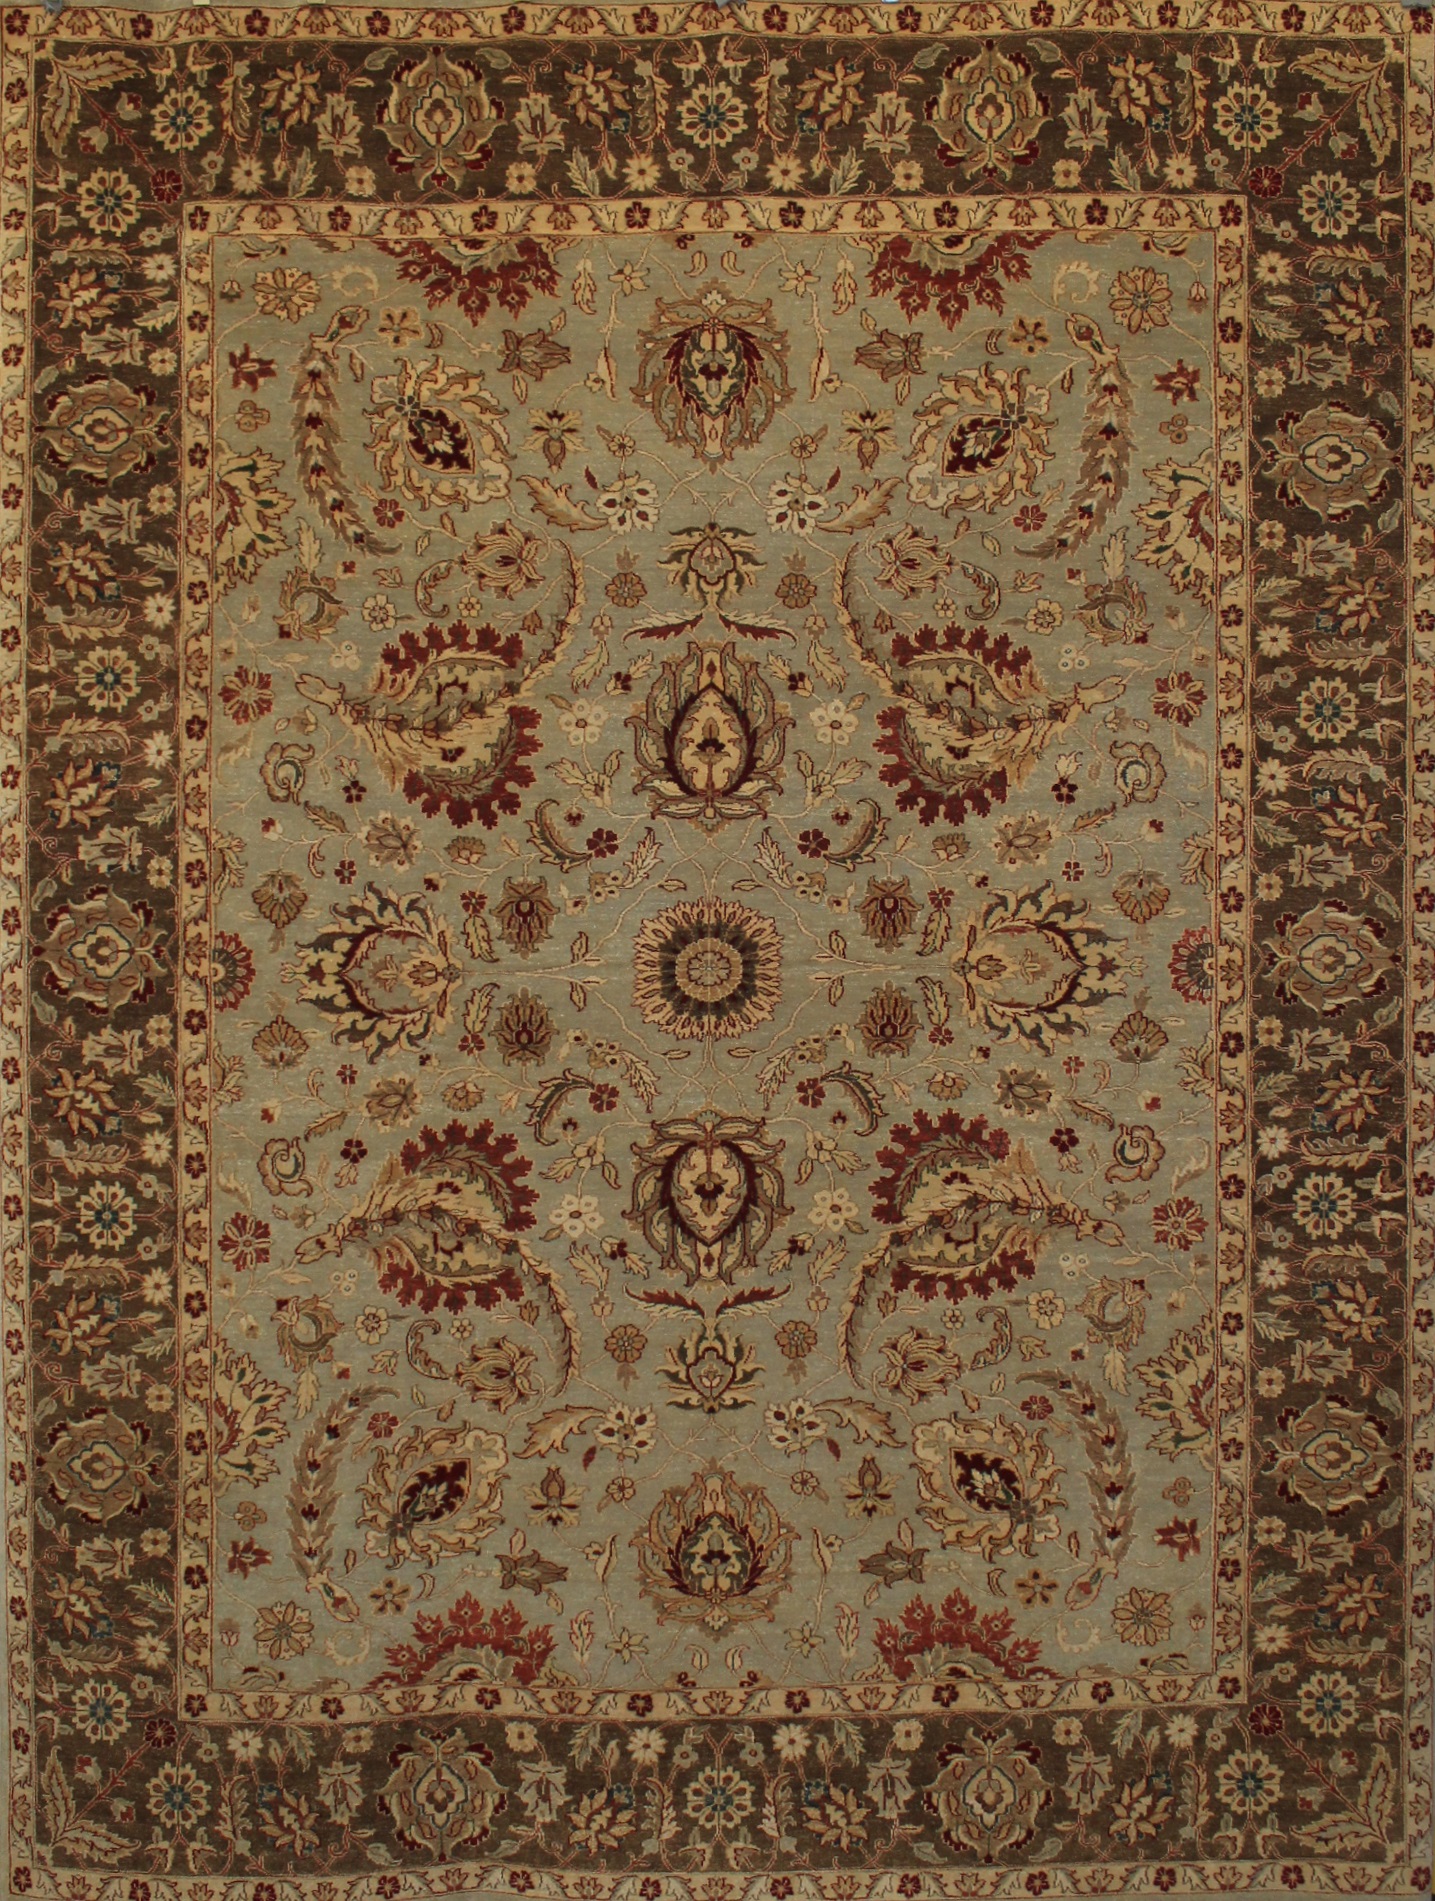 Clearance & Discount Rugs Ziegler Collection Hand Knotted Rug 10026 Aqua - Lt.Green & Lt. Brown - Chocolate Hand Knotted Rug